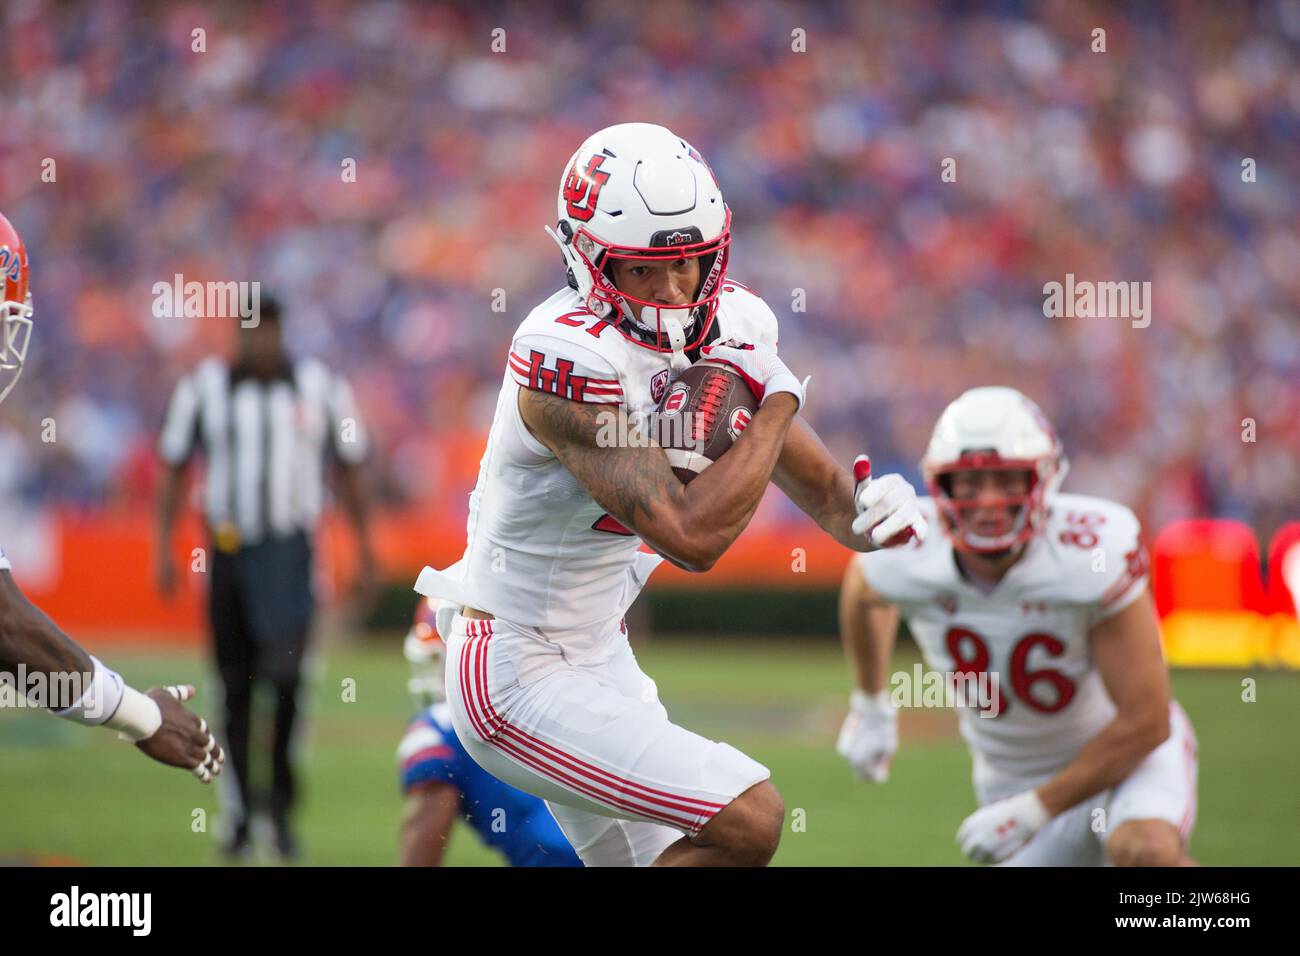 September 3, 2022: Utah Utes wide receiver Solomon Enis (21) move the ball up the field during the NCAA football game between the Utah Utes and the Florida Gators at Ben Hill Griffin Stadium Gainesville, FL. The Florida Gators defeat number 7 Utah Utes 29 to 26. Jonathan Huff/CSM. Stock Photo